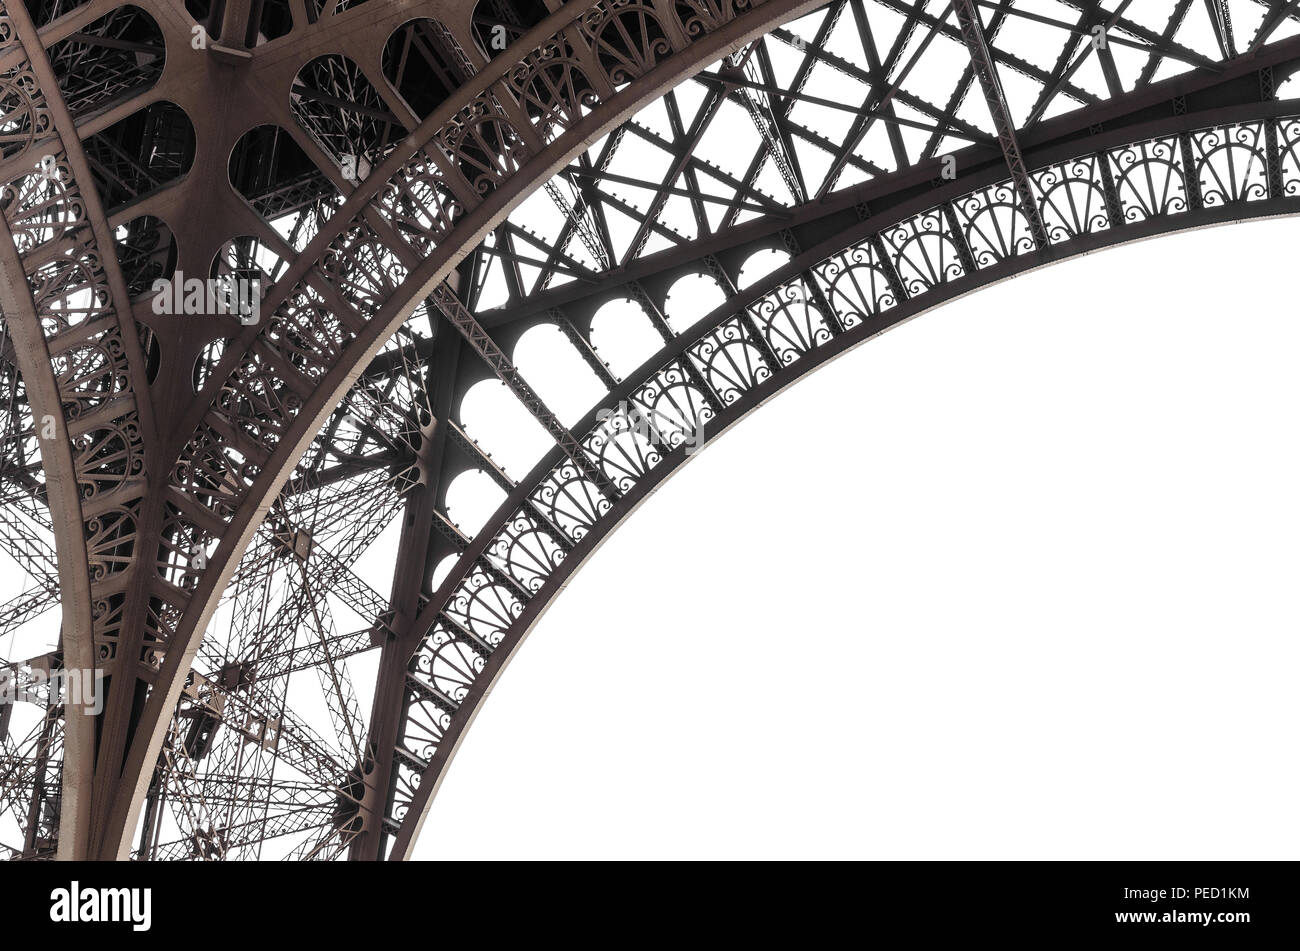 Elements of the Eiffel tower on a white background. Stock Photo